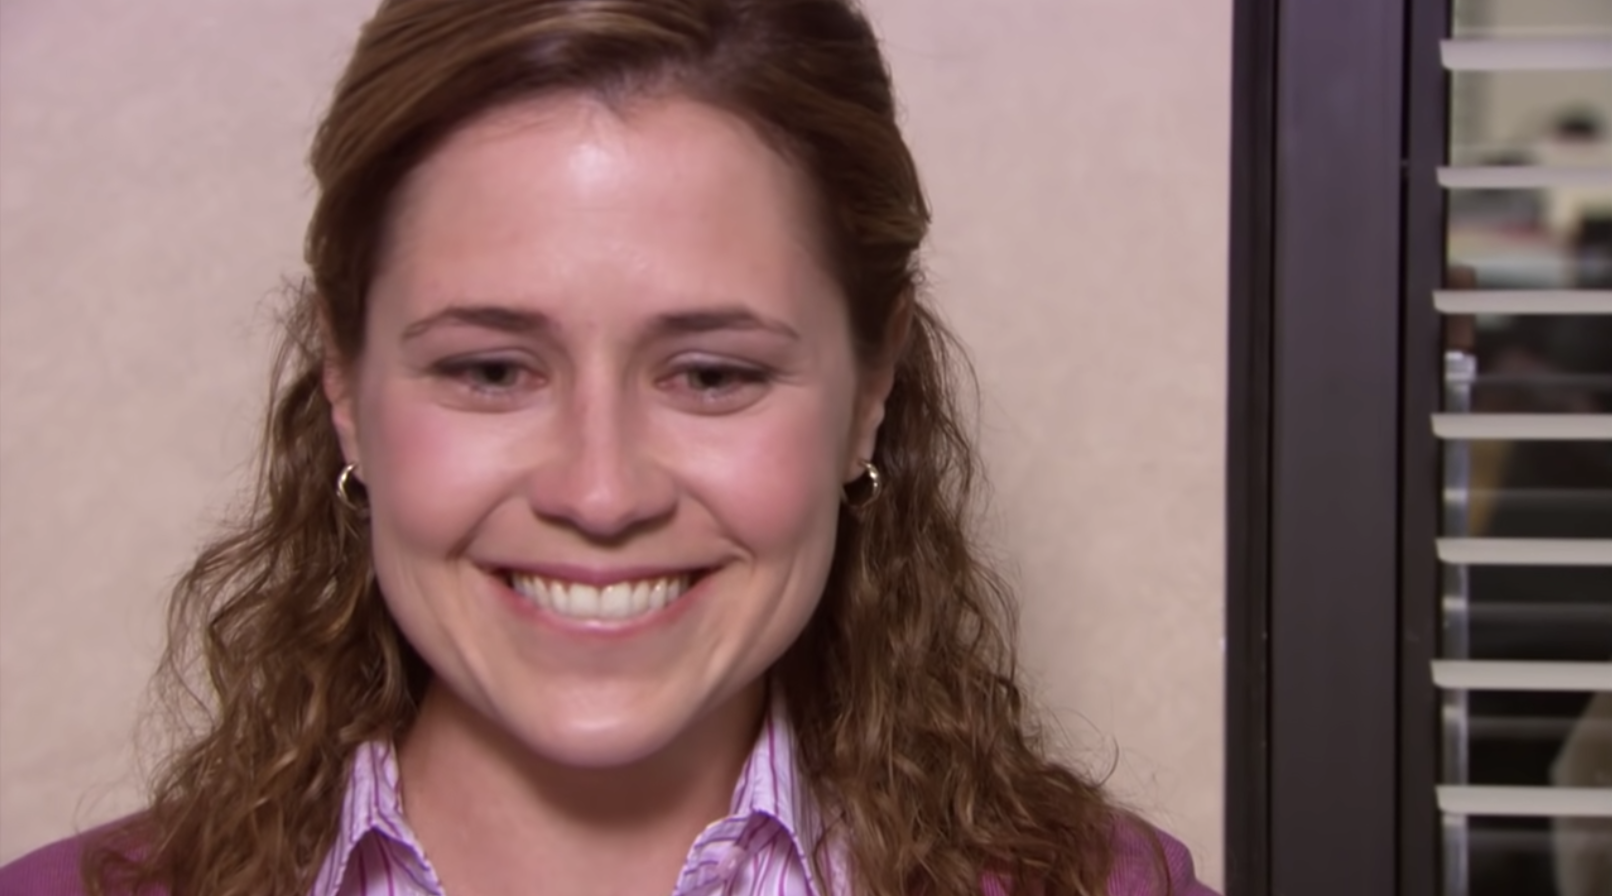 Crying and smiling Pam Beesly